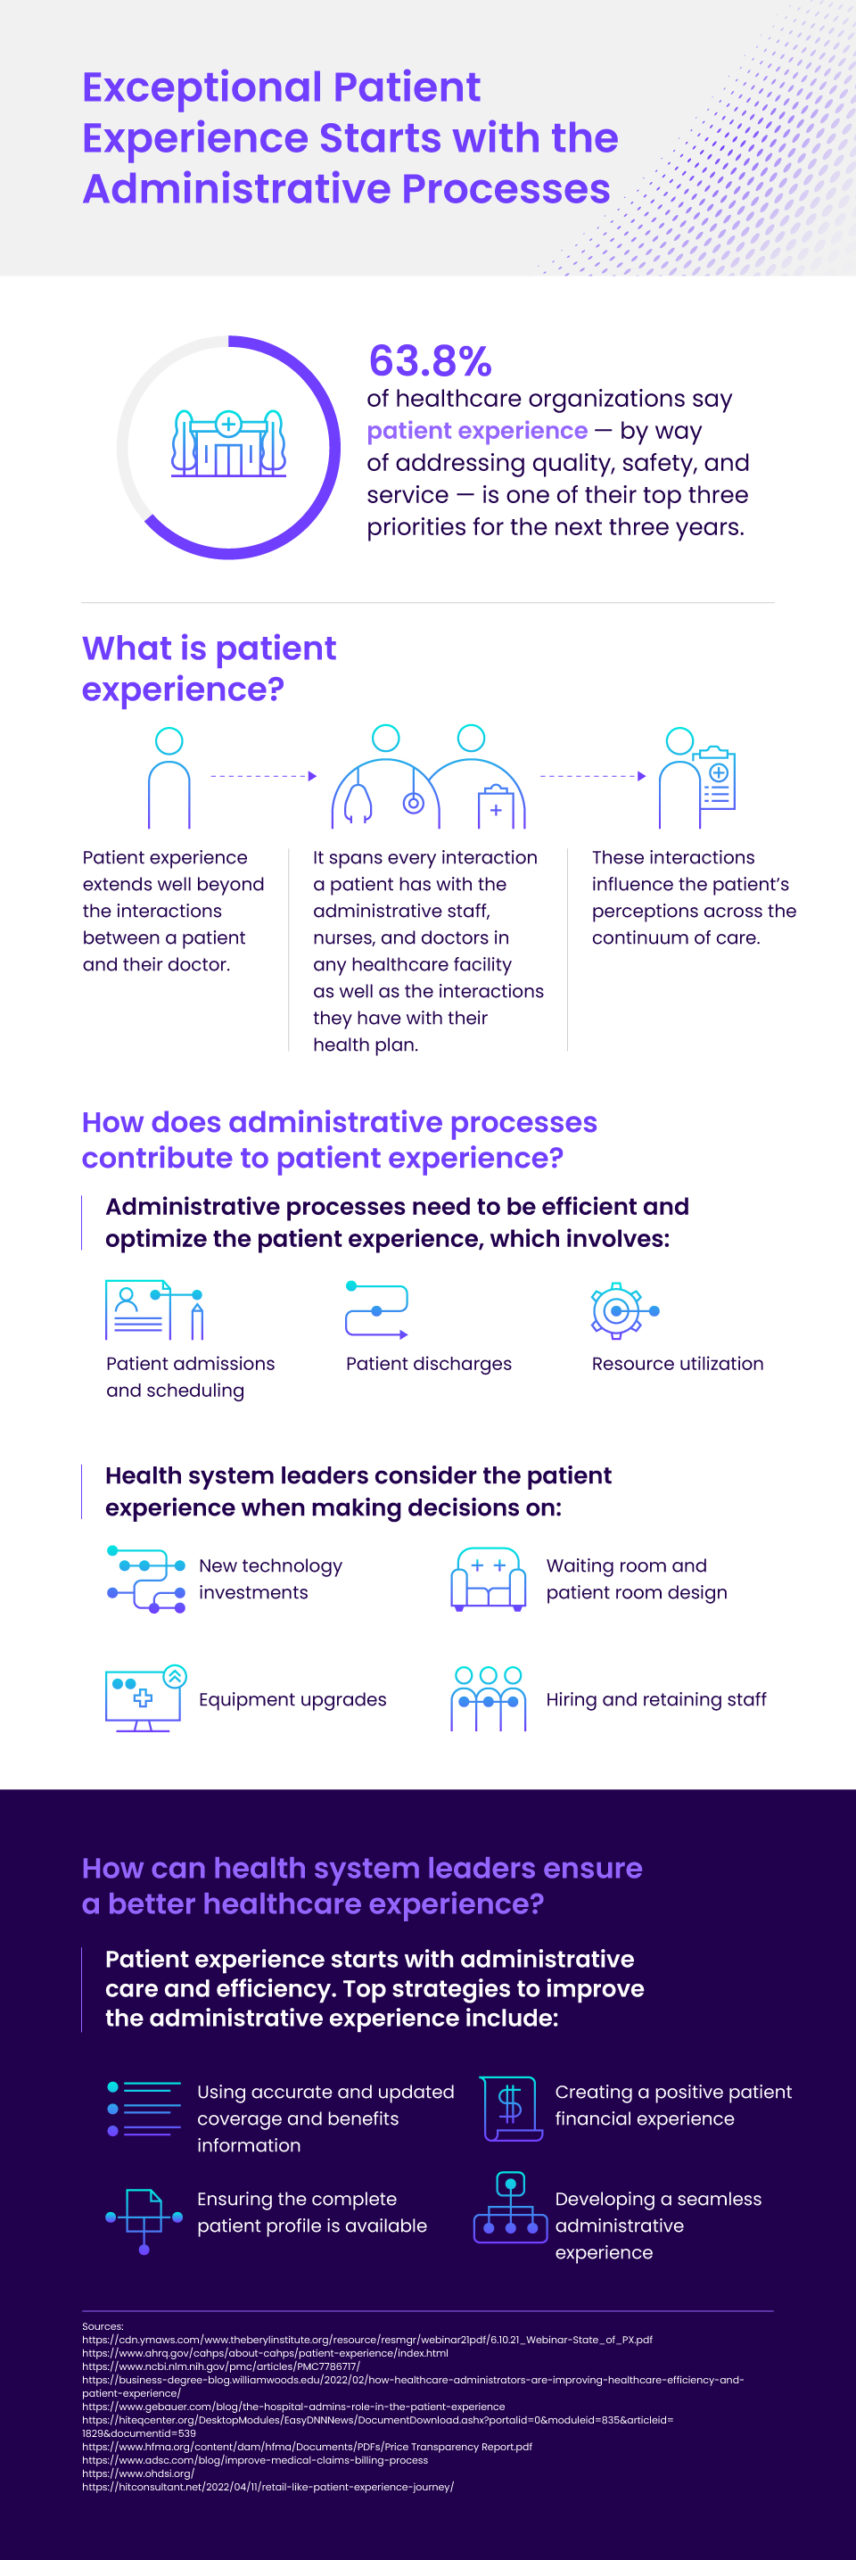 Exceptional Patient Experience Starts with Administrative Processess